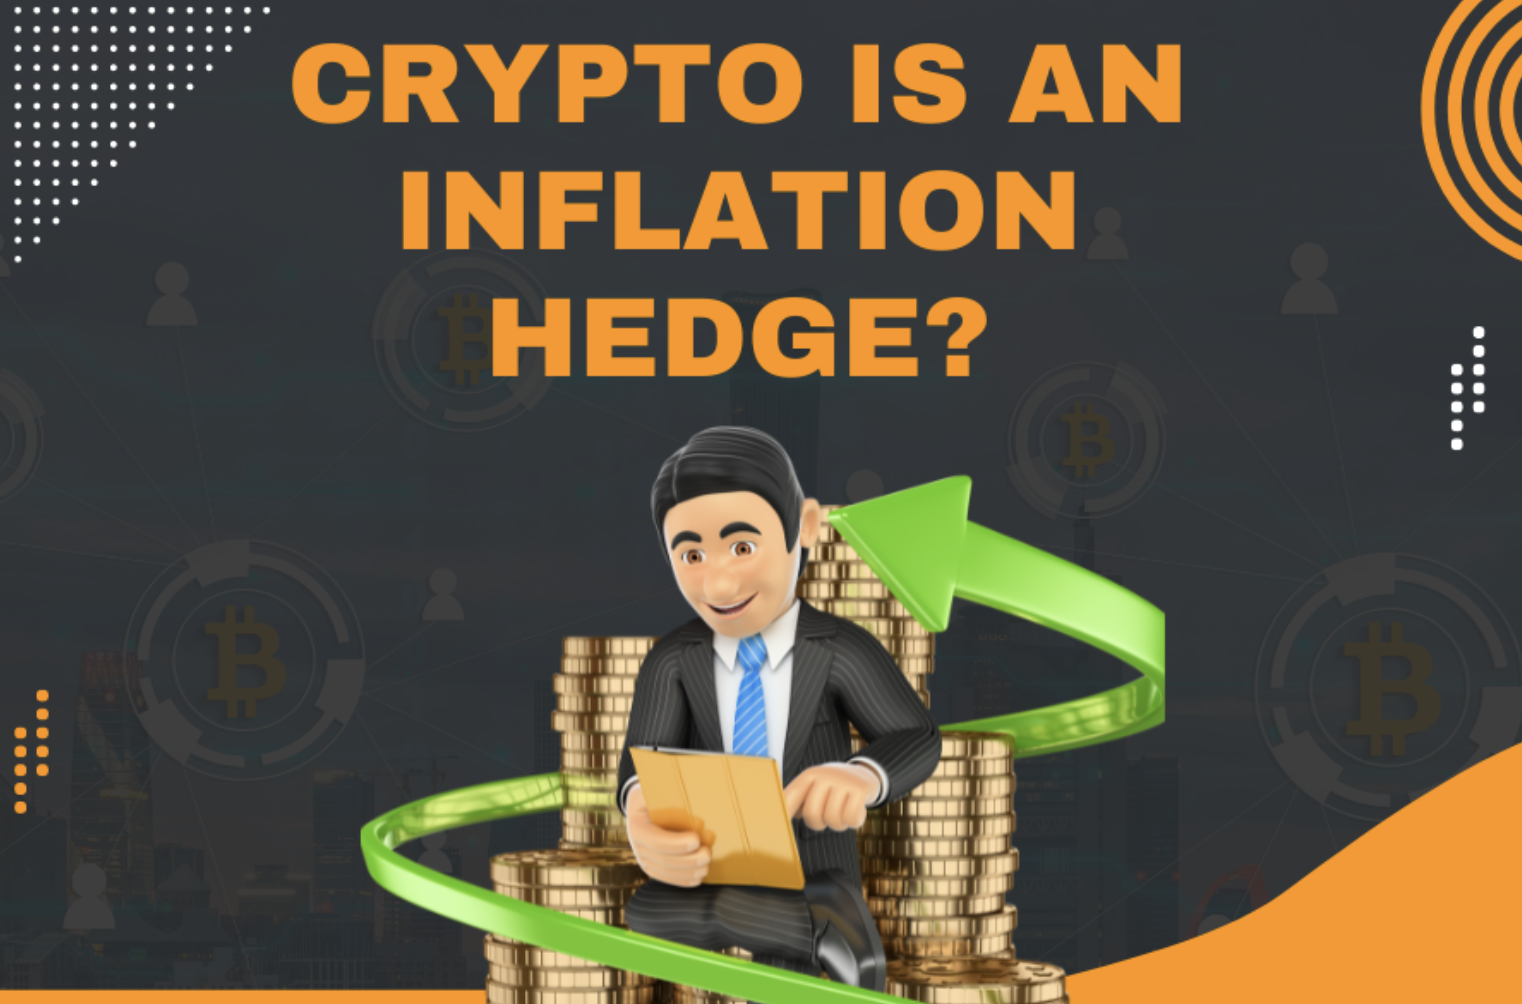 Ask CryptoVantage: Can I Hedge Against Inflation with Crypto Investments?